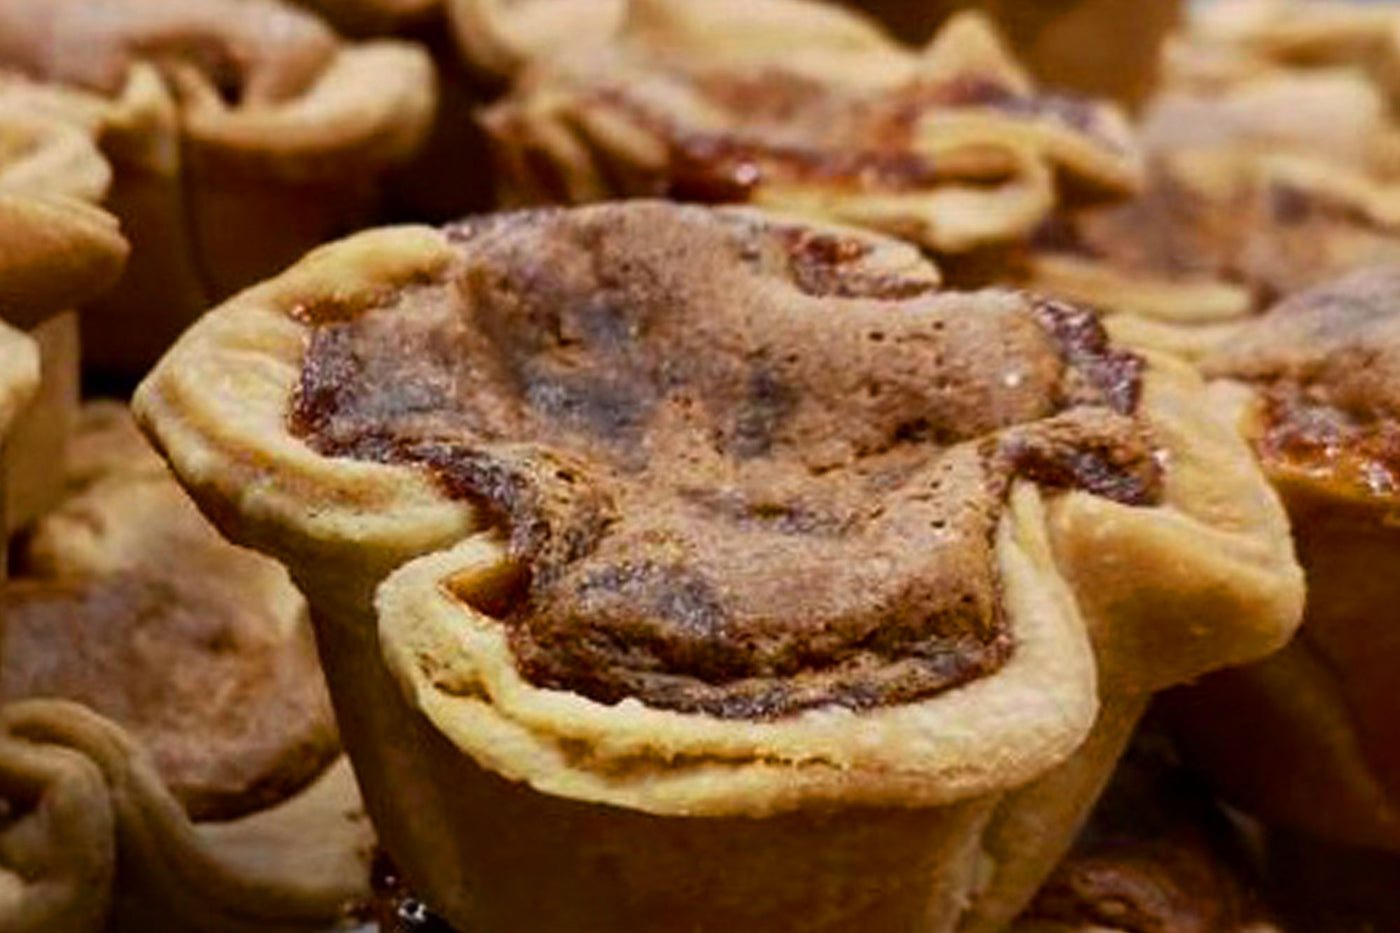 Sharman's Proper Pies - Butter Tarts - Pack of 6